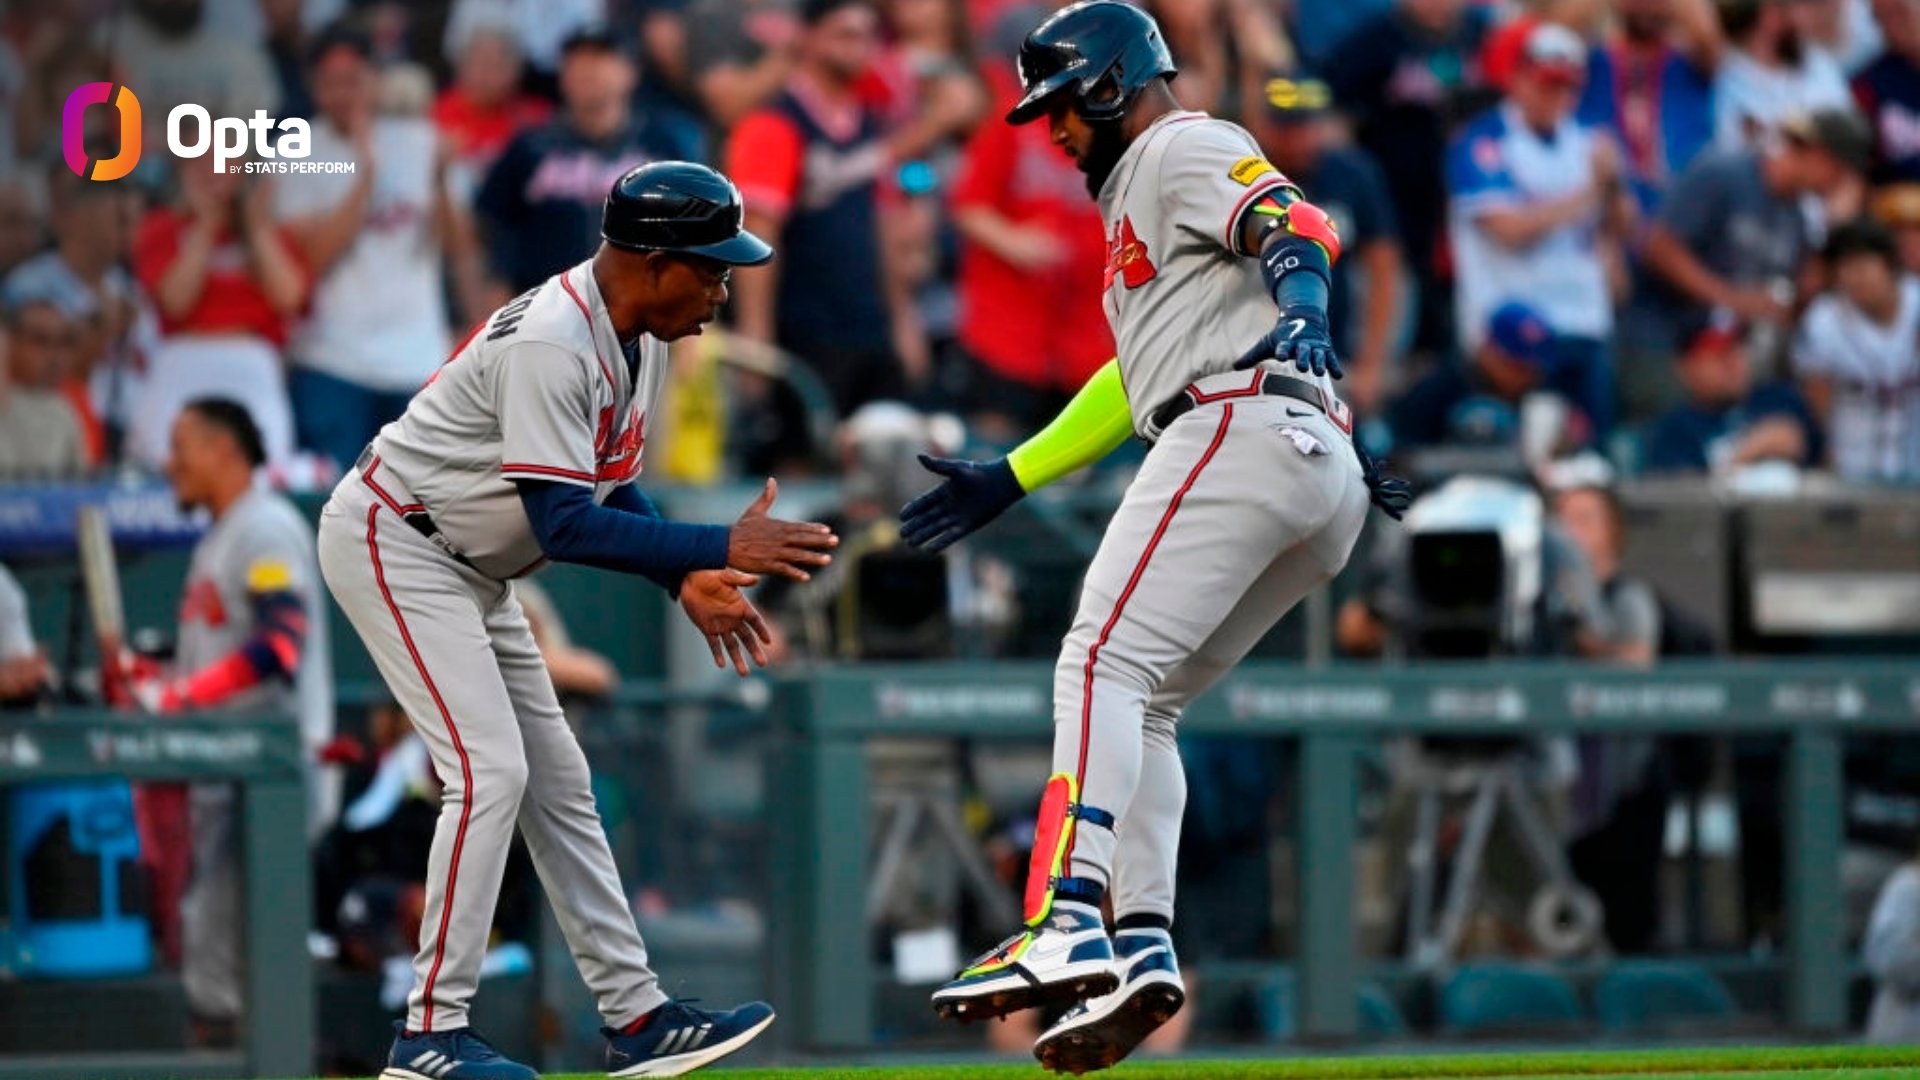 OptaSTATS on X: The Atlanta @Braves have reached 250 homers this